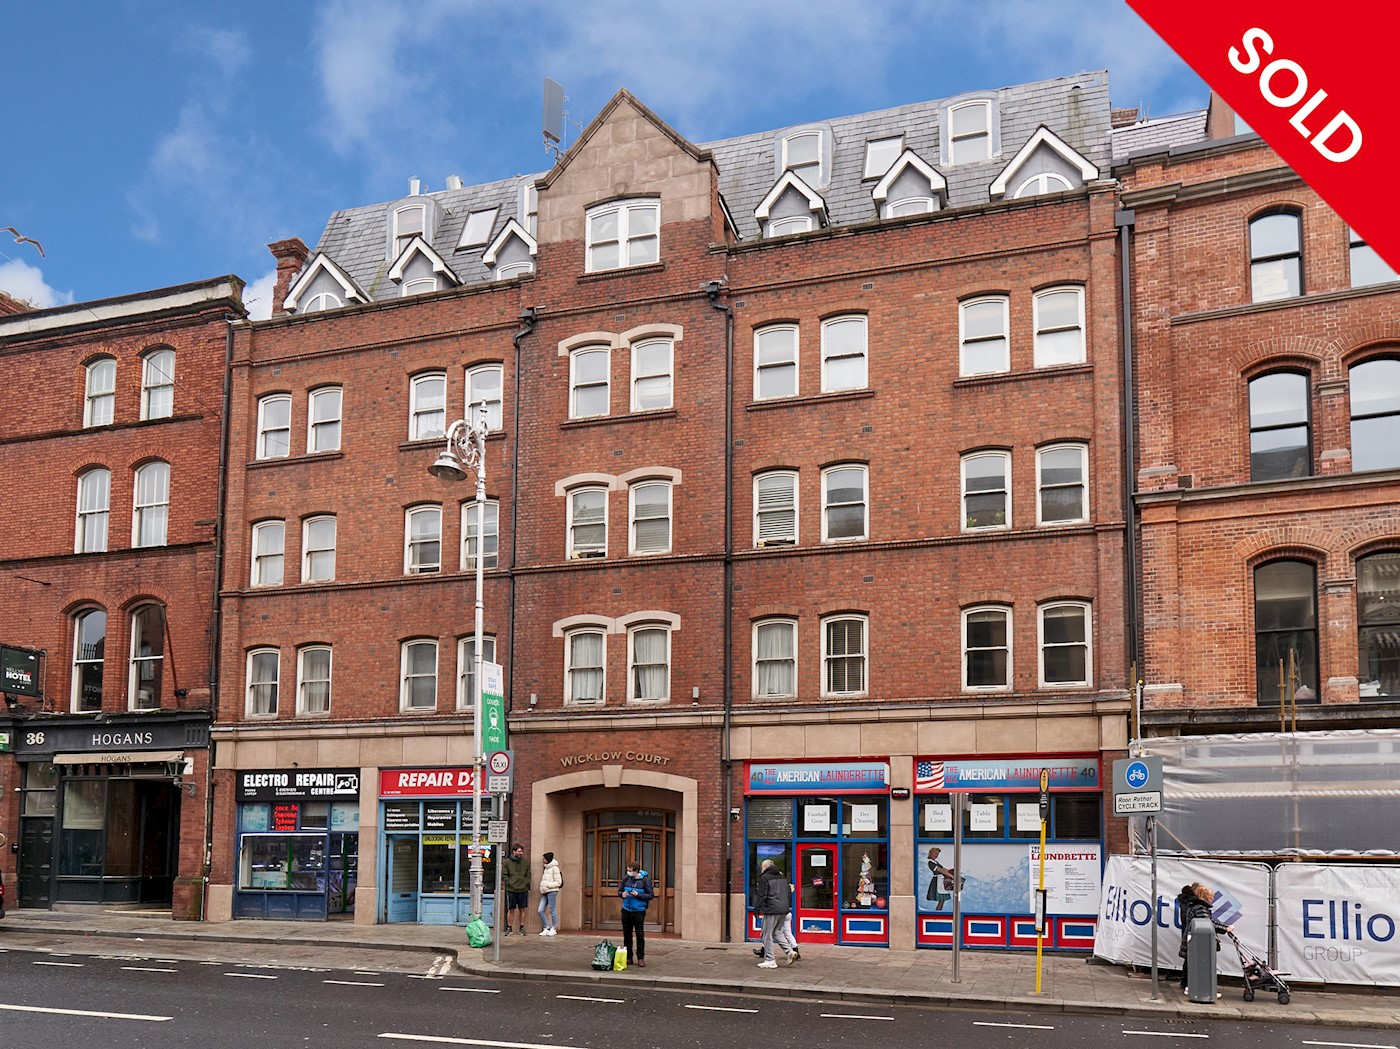 46 Wicklow Court, South Great George's Street, Dublin 2, . 1/13